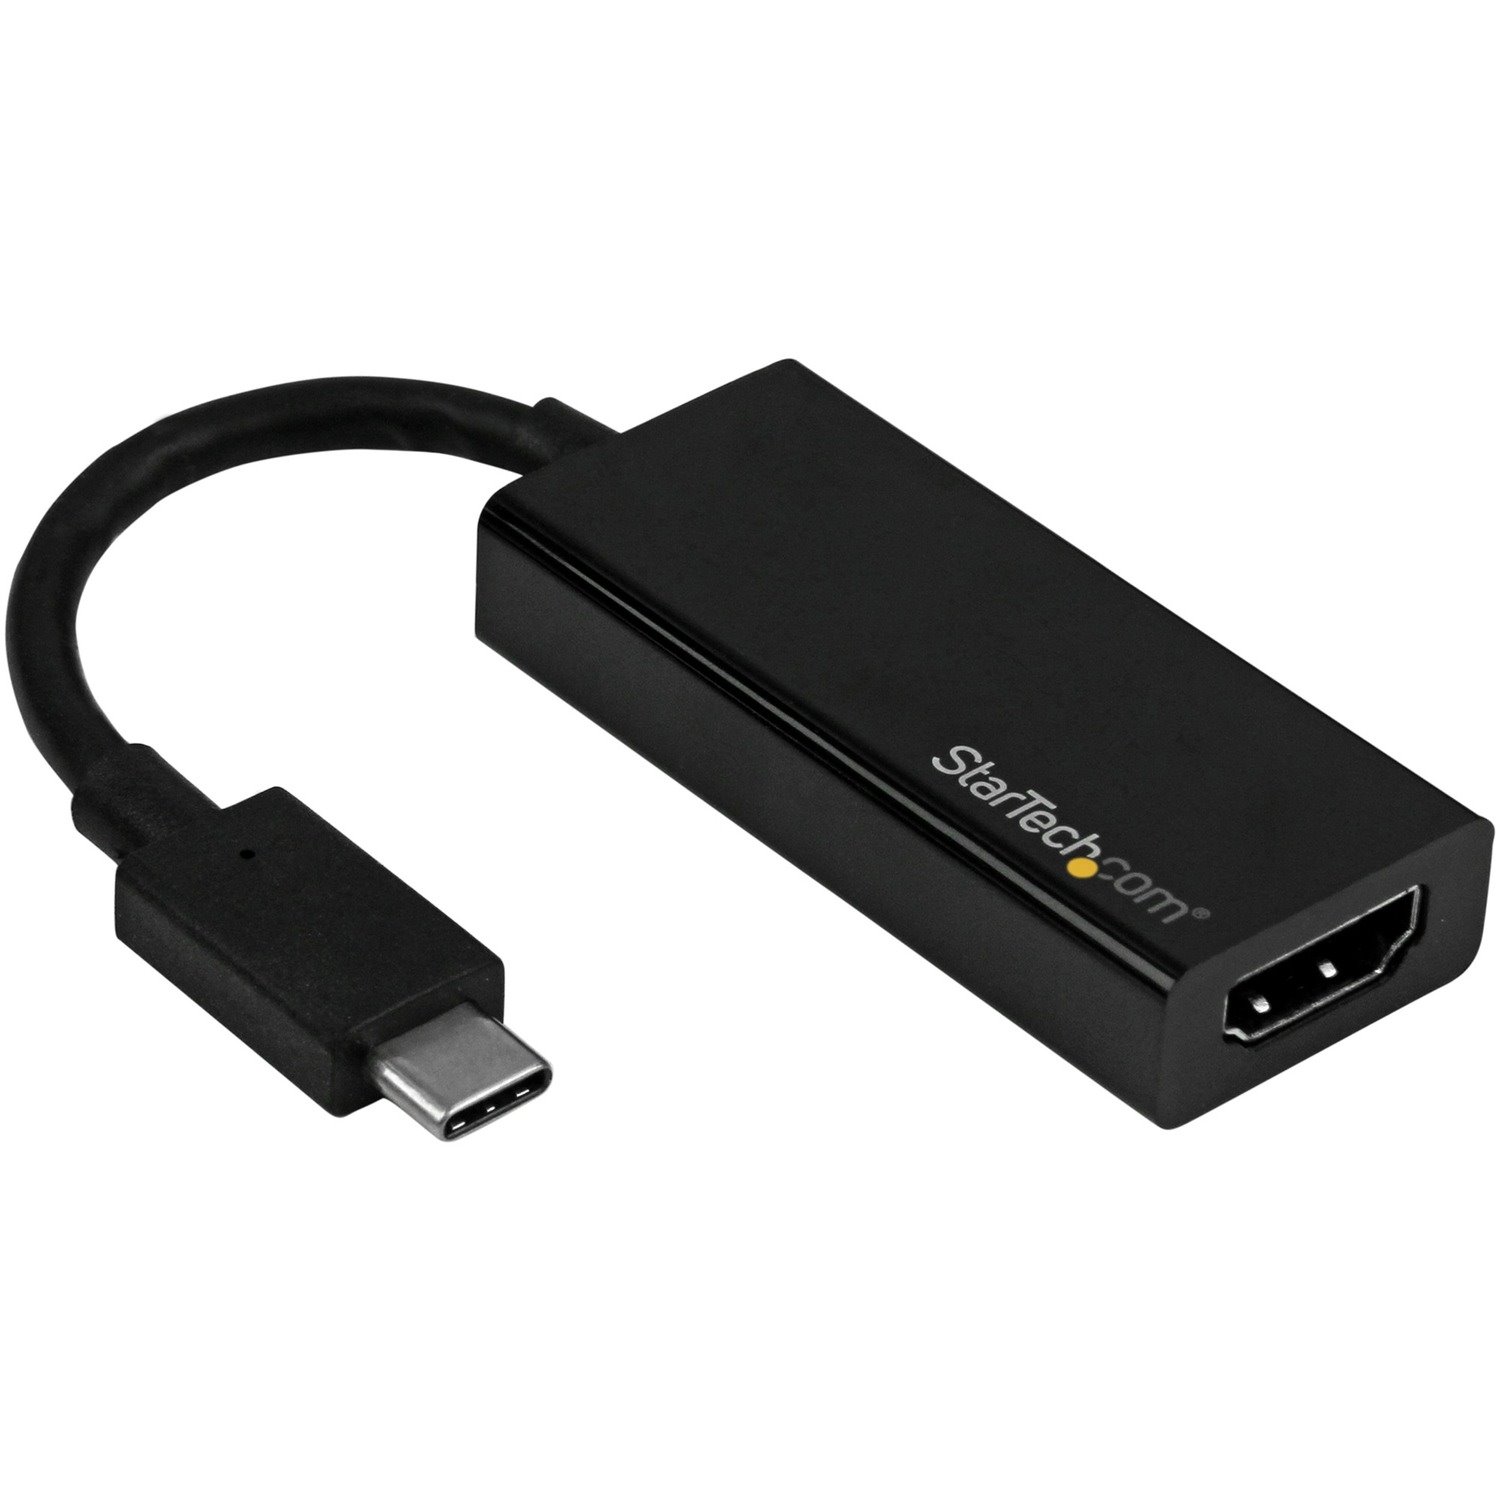 StarTech.com USB C to HDMI Adapter - 4K 60Hz - Thunderbolt 3 Compatible - USB-C Adapter - USB Type C to HDMI Dongle Converter